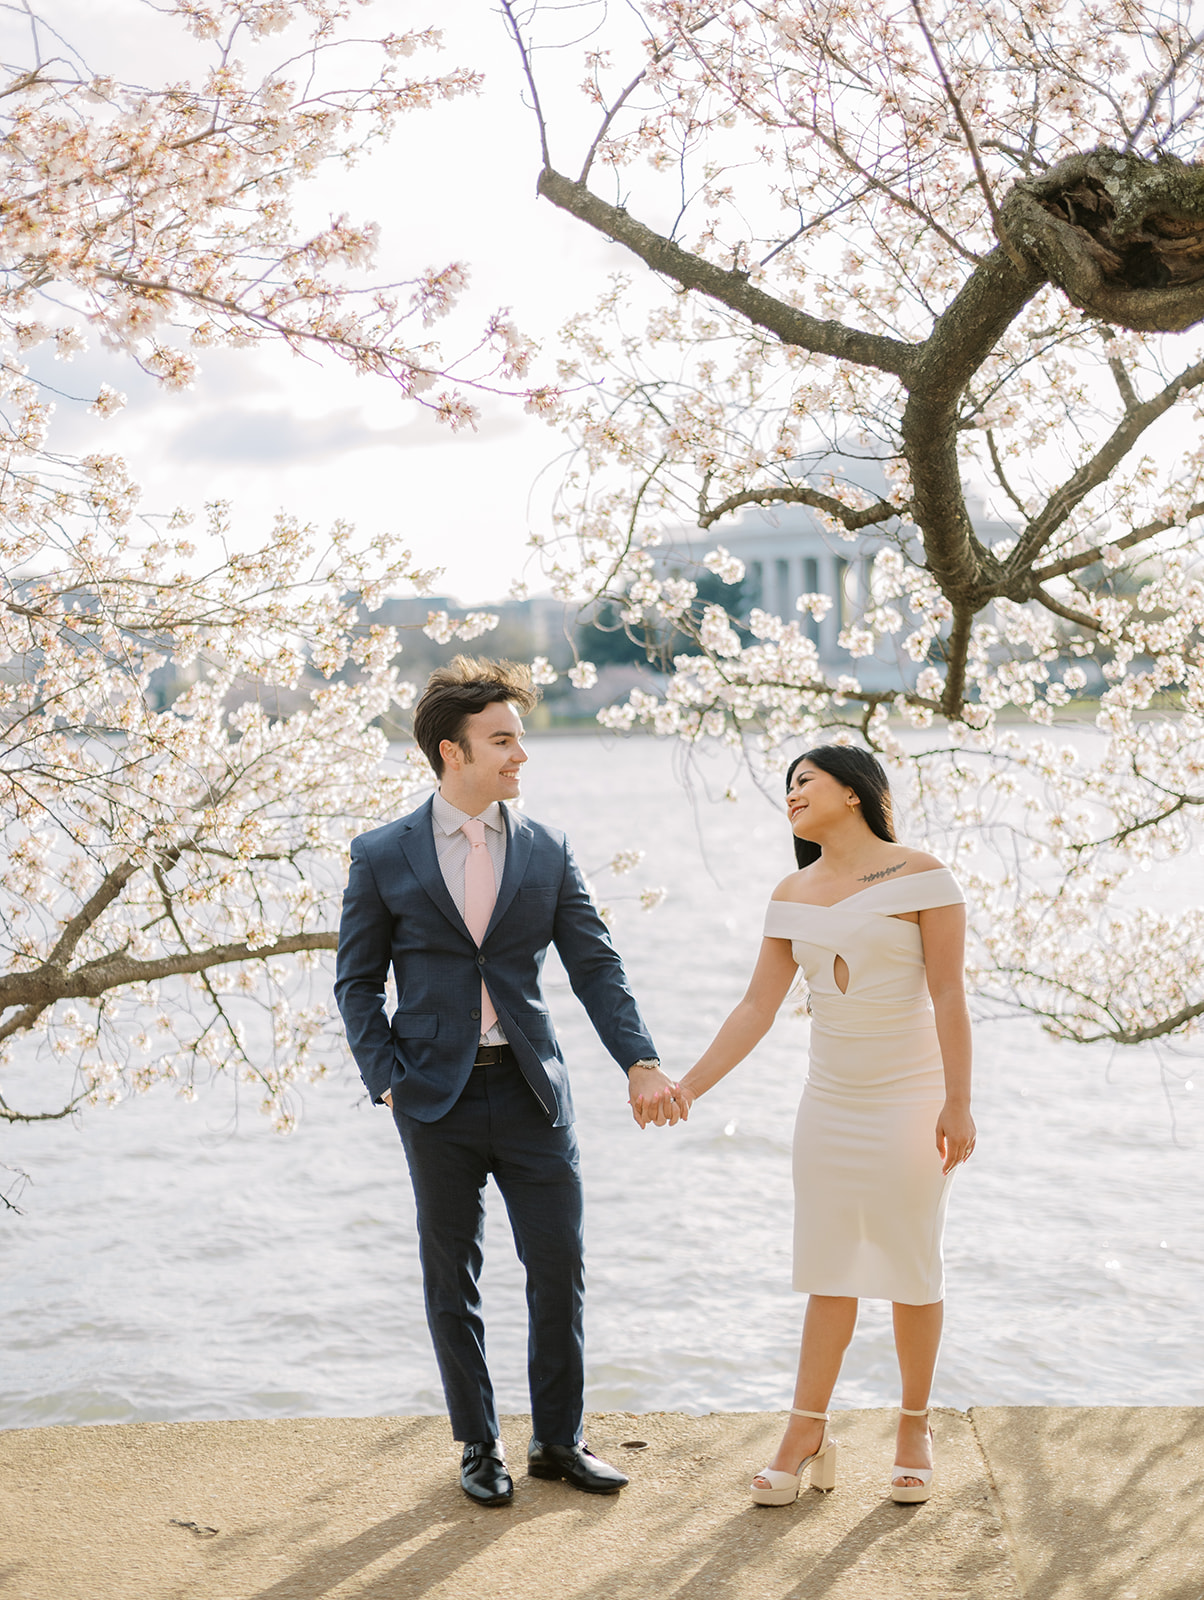 An engaged couple holding hands in front of peak-bloom cherry blossom trees in Washington DC.